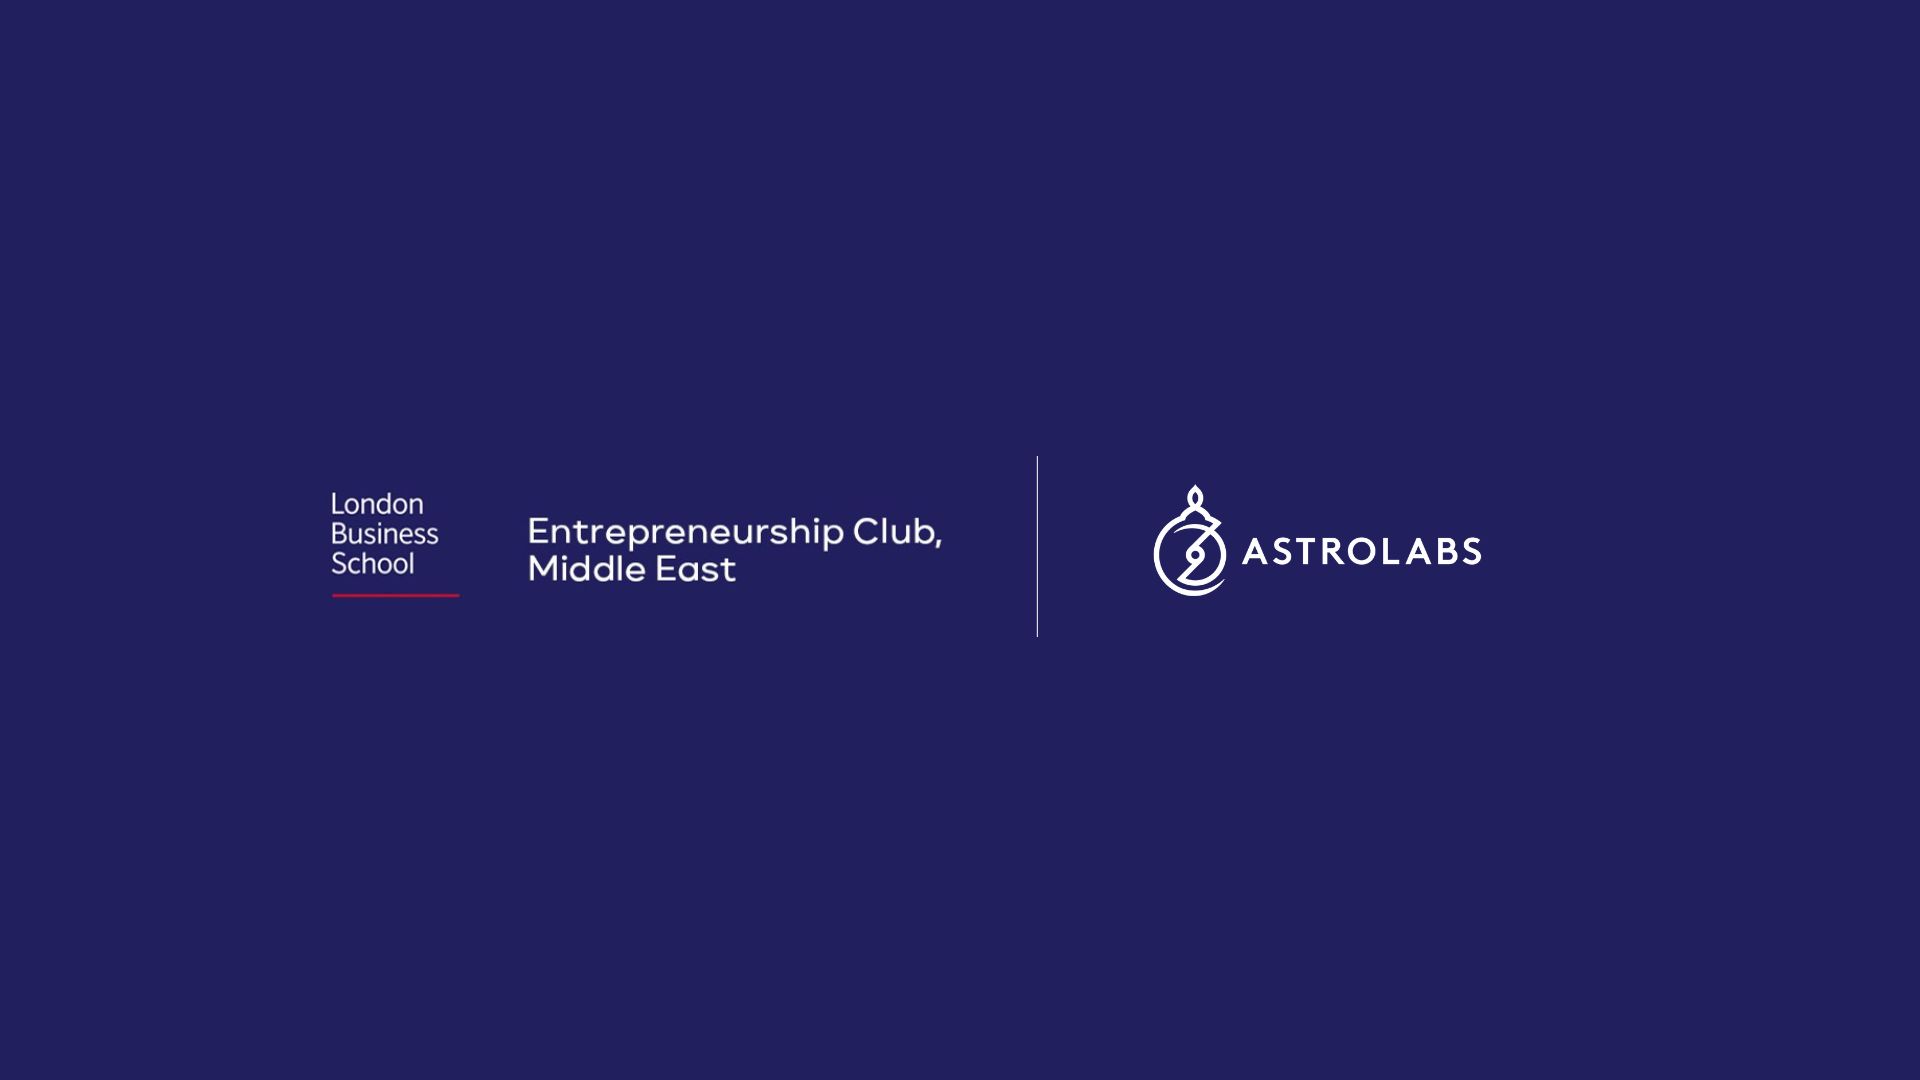 AstroLabs: "Community Partner" for MENA startup event